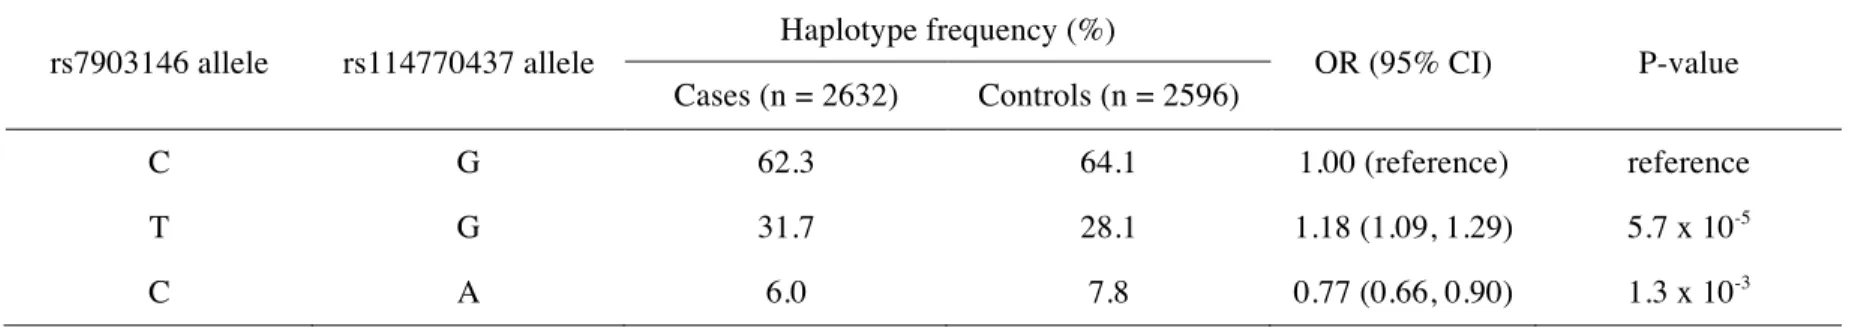 Table 3.4:  Haplotype analysis of SNPs rs7903146 and rs114770437 in TCF7L2.